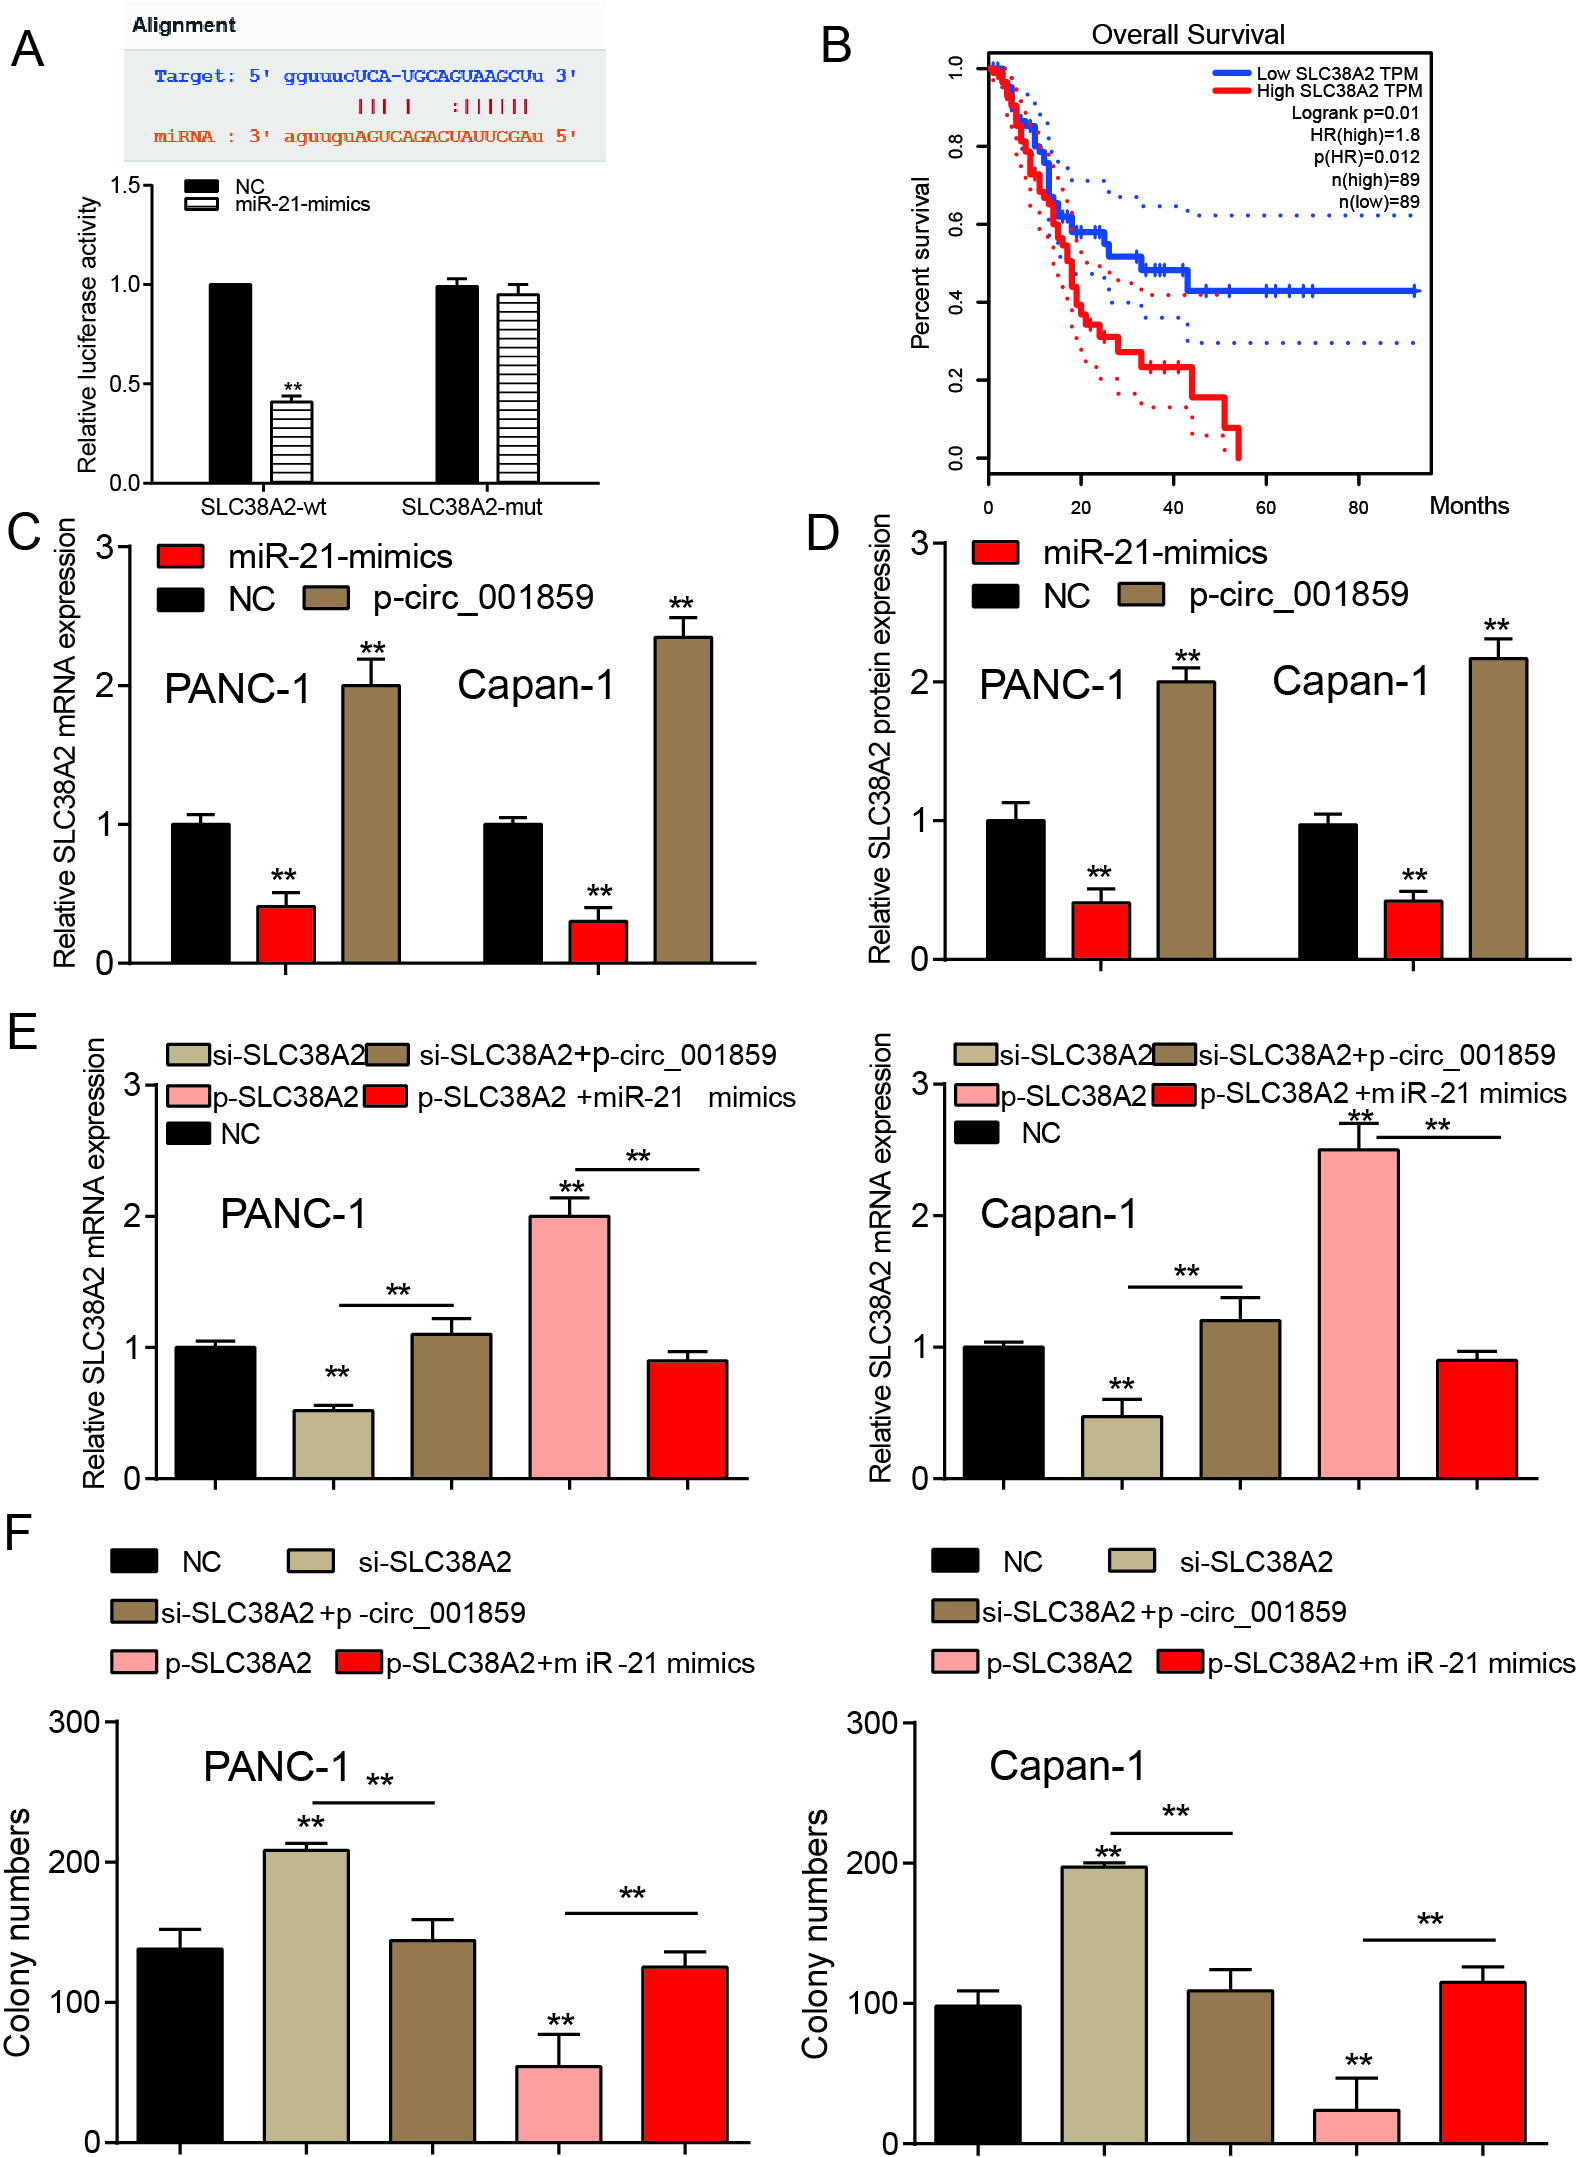 MiR-21-5p suppressed SLC38A2 expression and SLC38A2 suppression promoted cell proliferation. (A) MiR-21-5p directly targeted at SLC38A2. (B) TCGA data validated the overall survival of SLC38A2 in pancreatic cancer. (C–D) MiR-21-5p mimics suppressed SLC38A2 mRNA or protein expression but p-circ_001859 enhanced SLC38A2 expression. (E) Si-SLC38A2 suppressed SLC38A2 protein and mRNA expression and p-circ_001859 could restore the suppression. p-SLC38A2 enhanced SLC38A2 protein and mRNA expression and miR-21-5p mimics rescued the enhancement. (F) Si-SLC38A2 increased cell proliferation and p-SLC38A2 suppressed the proliferation. P**< 0.01, P*⁣**< 0.001 indicated statistical significance.